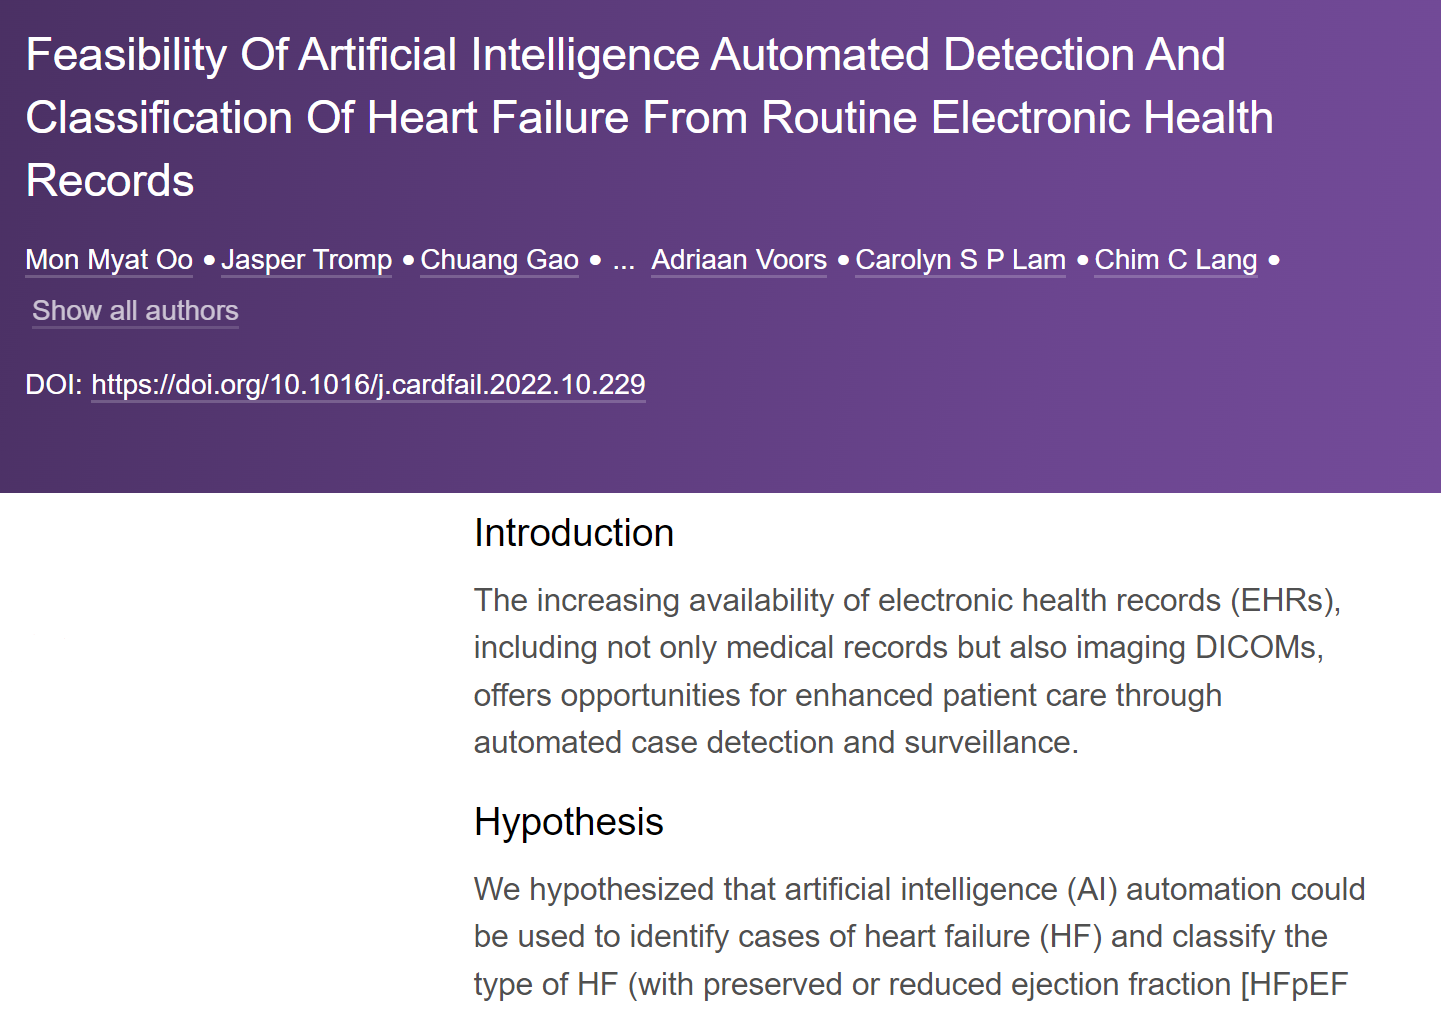 AI for Heart Failure Detection In EHRs